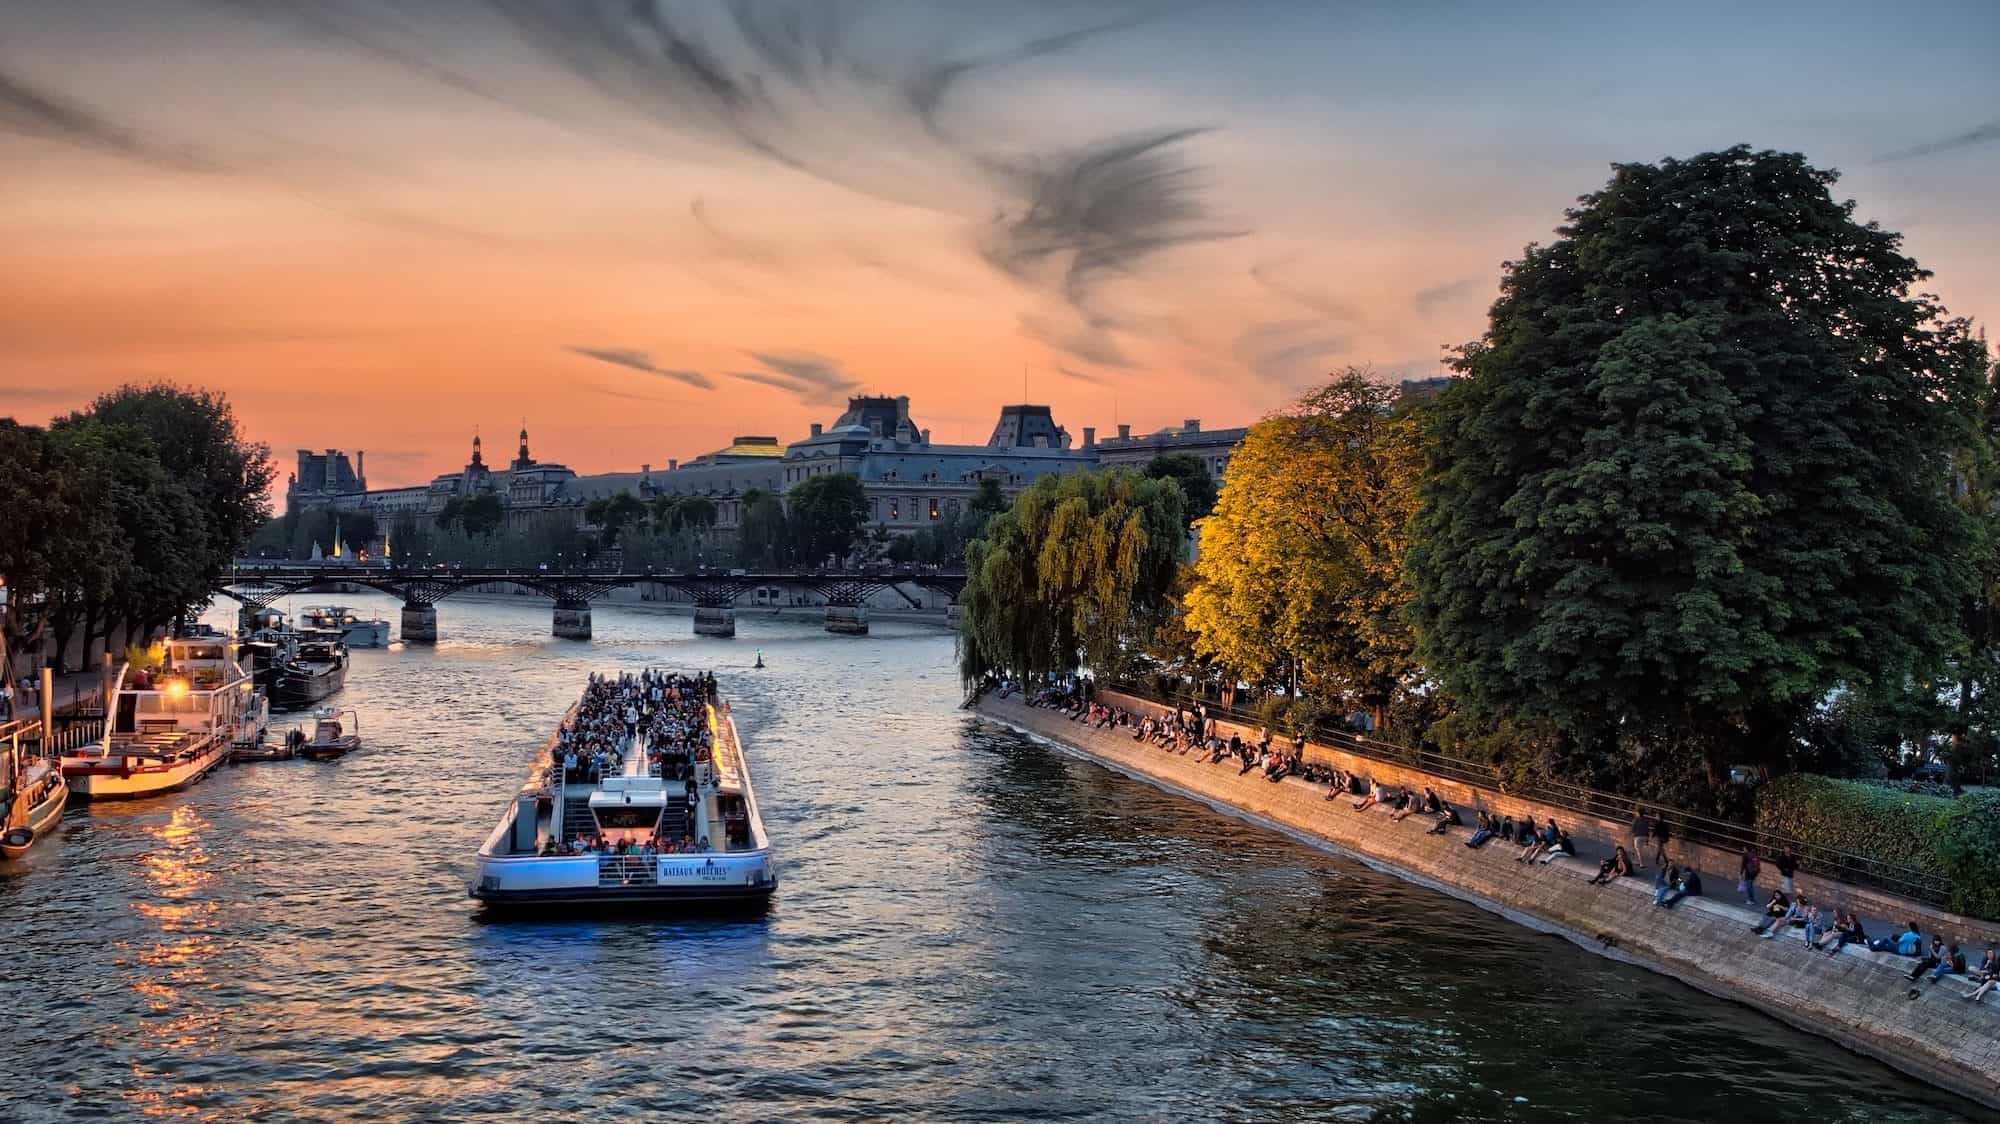 A view of the River Seine at sunset and a boat is sailing on the water, everything around it is golden from the sunlight.  